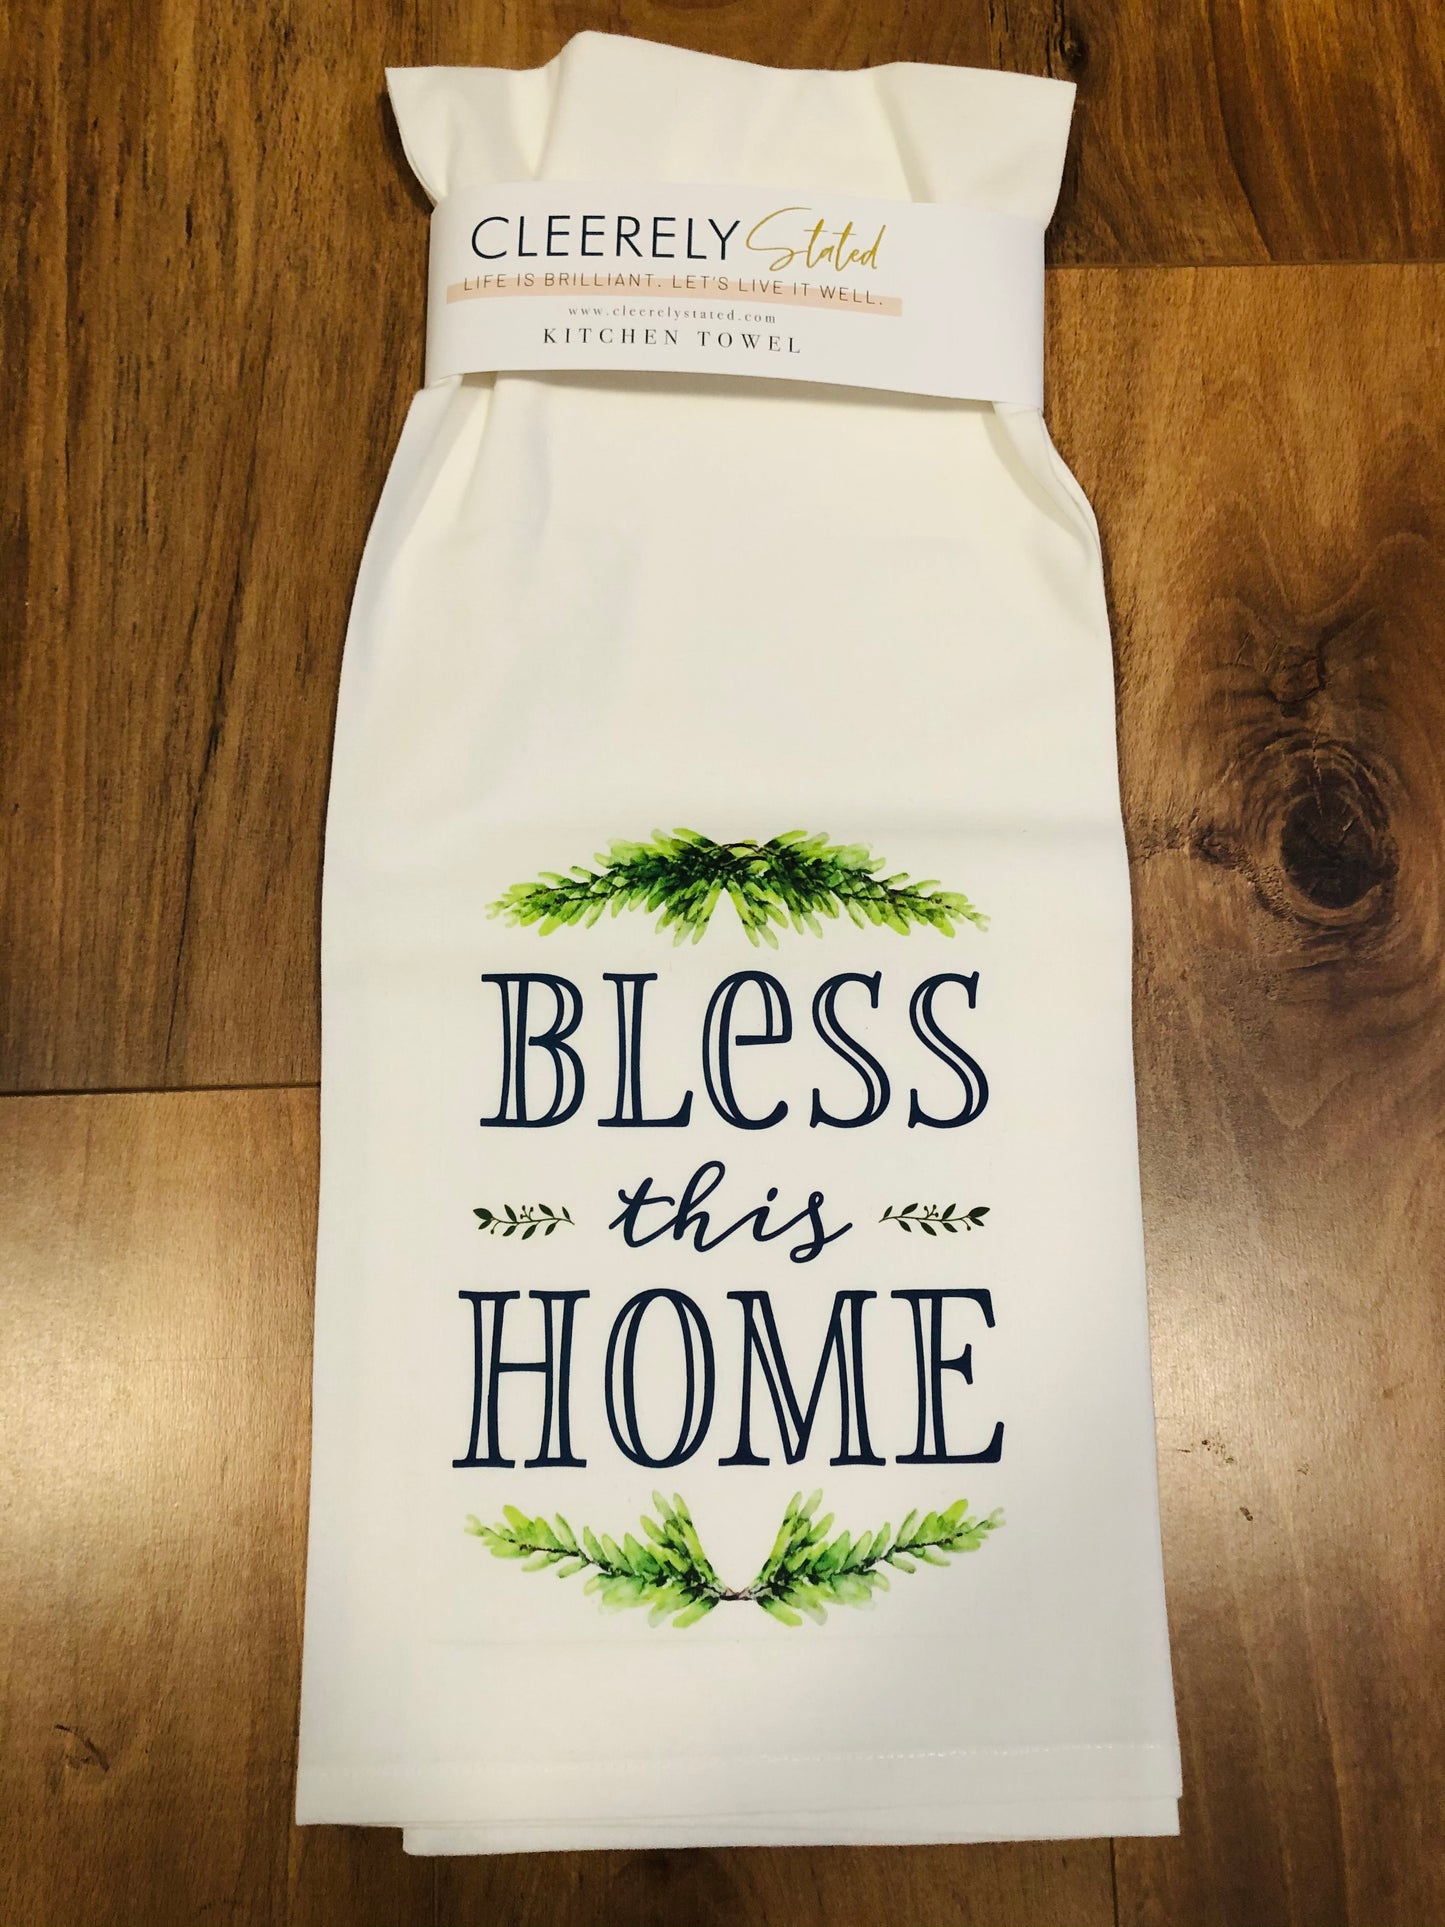 Cleerely Stated Kitchen Towel